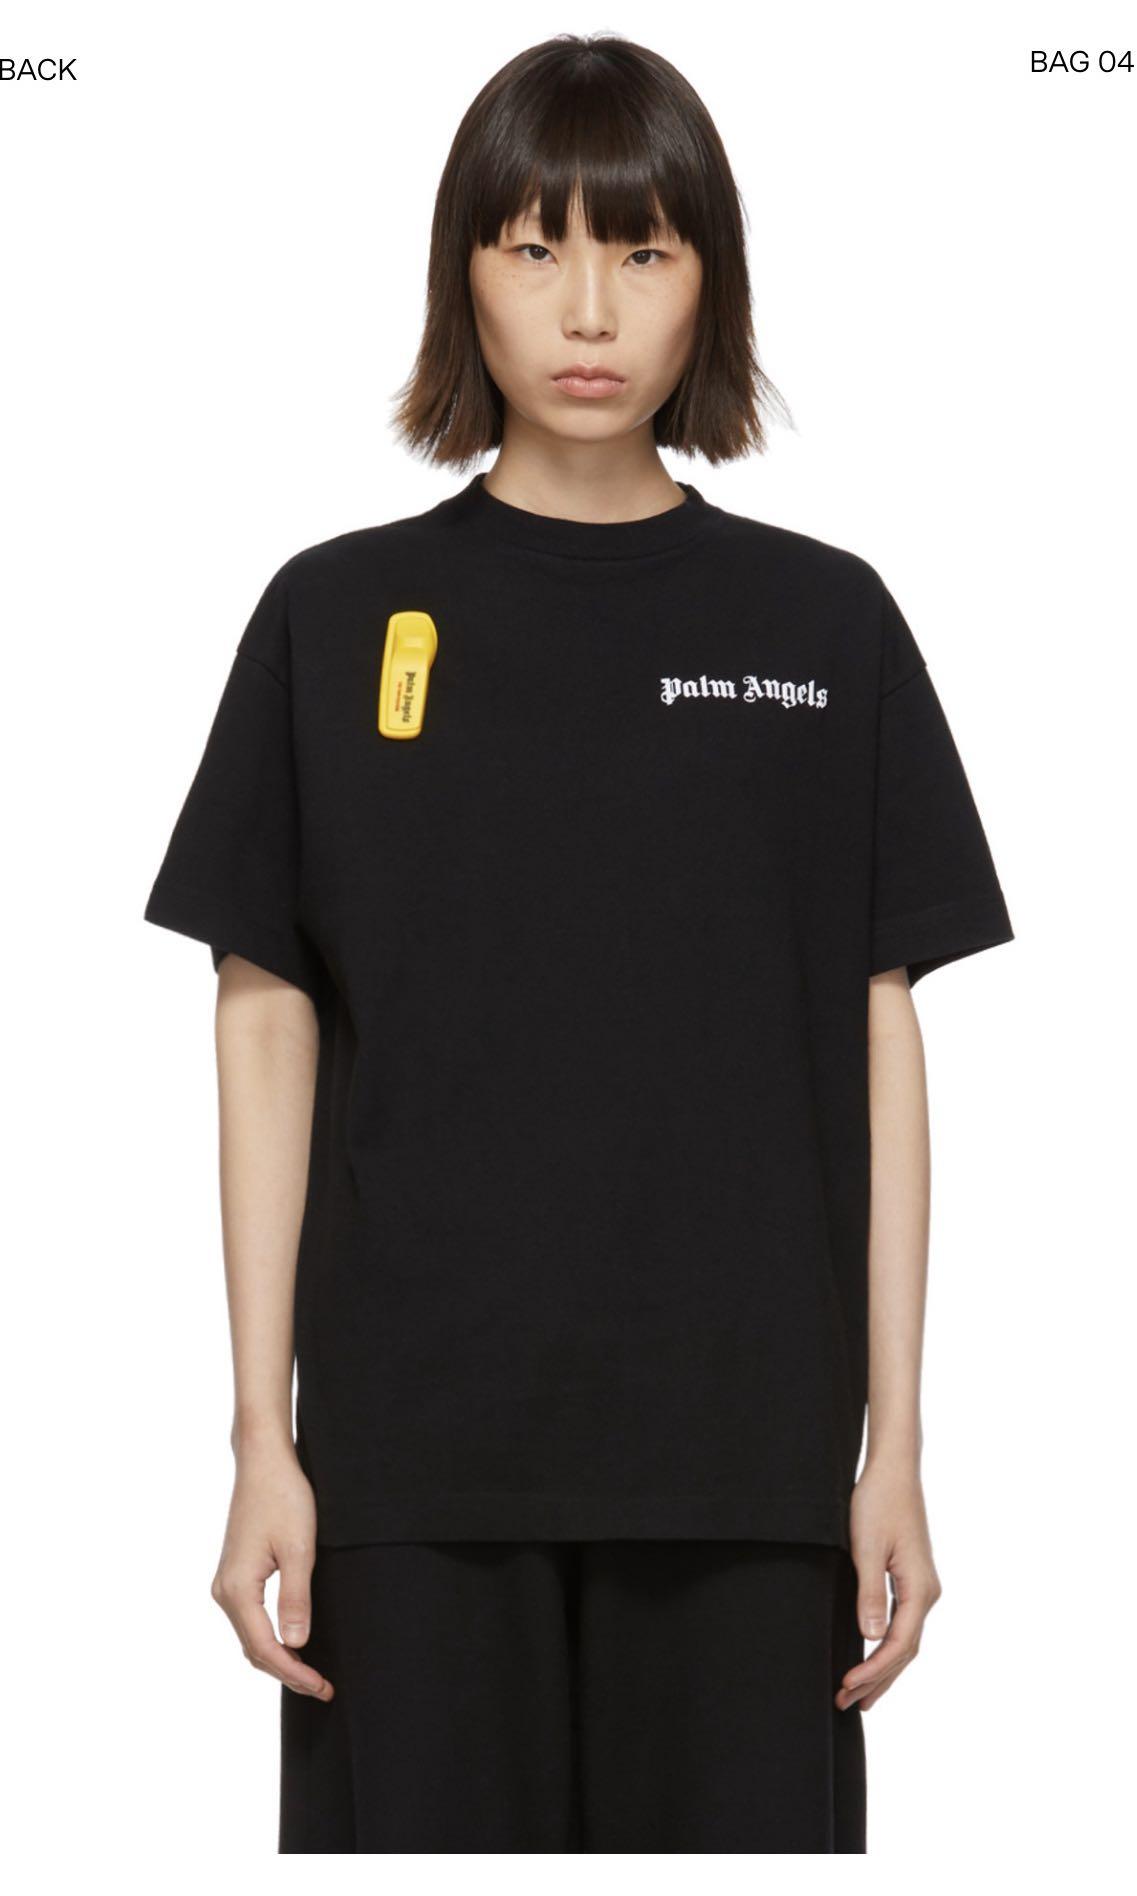 palm angels security tag tee